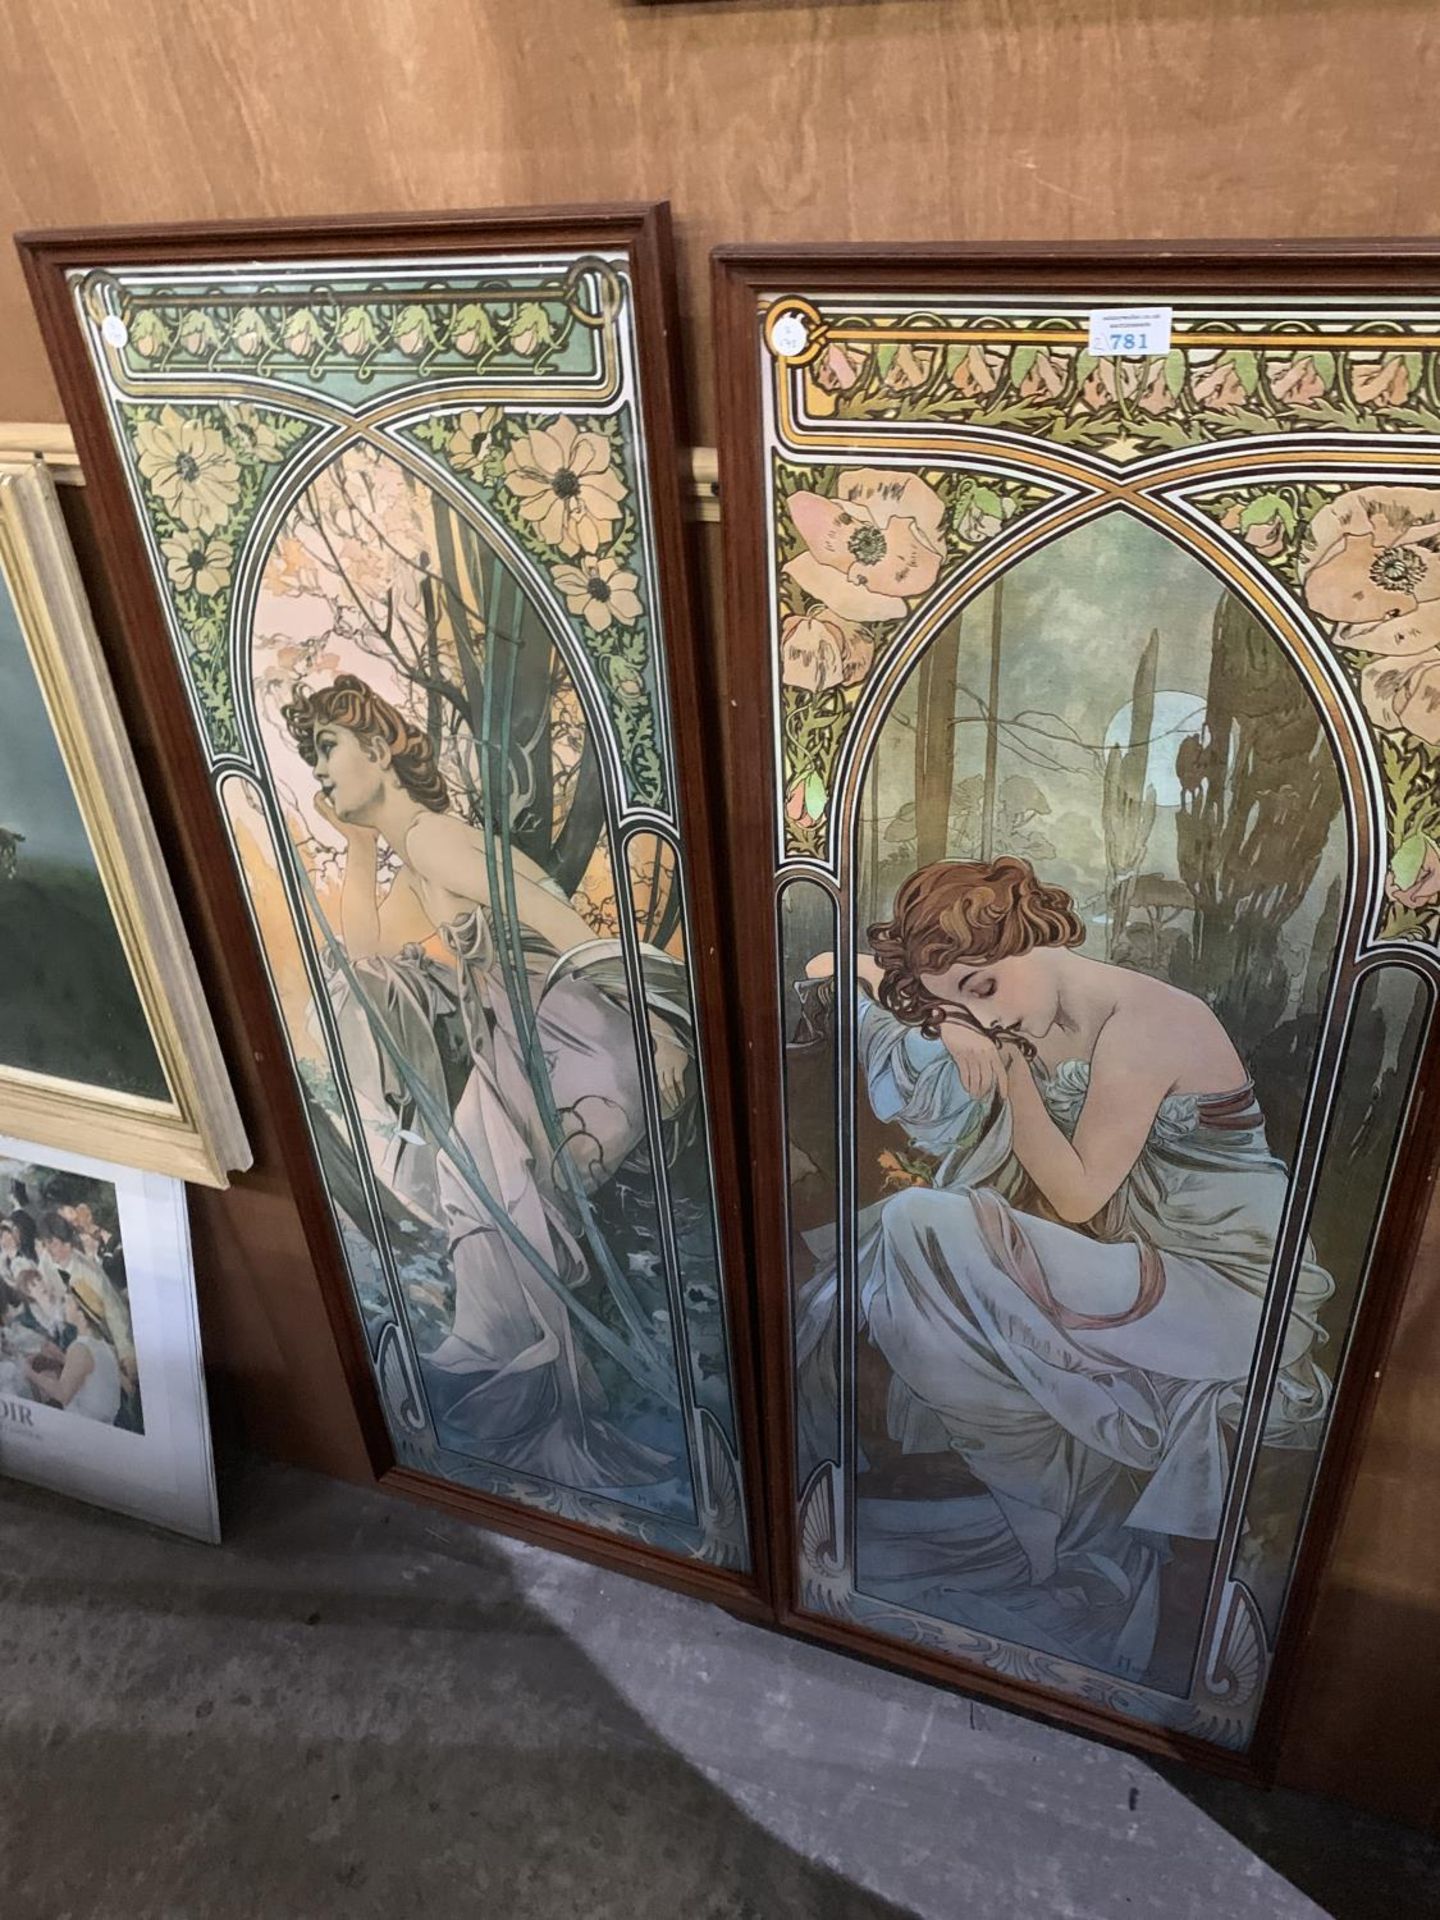 A PAIR OF WOODEN FRAMED PRINTS